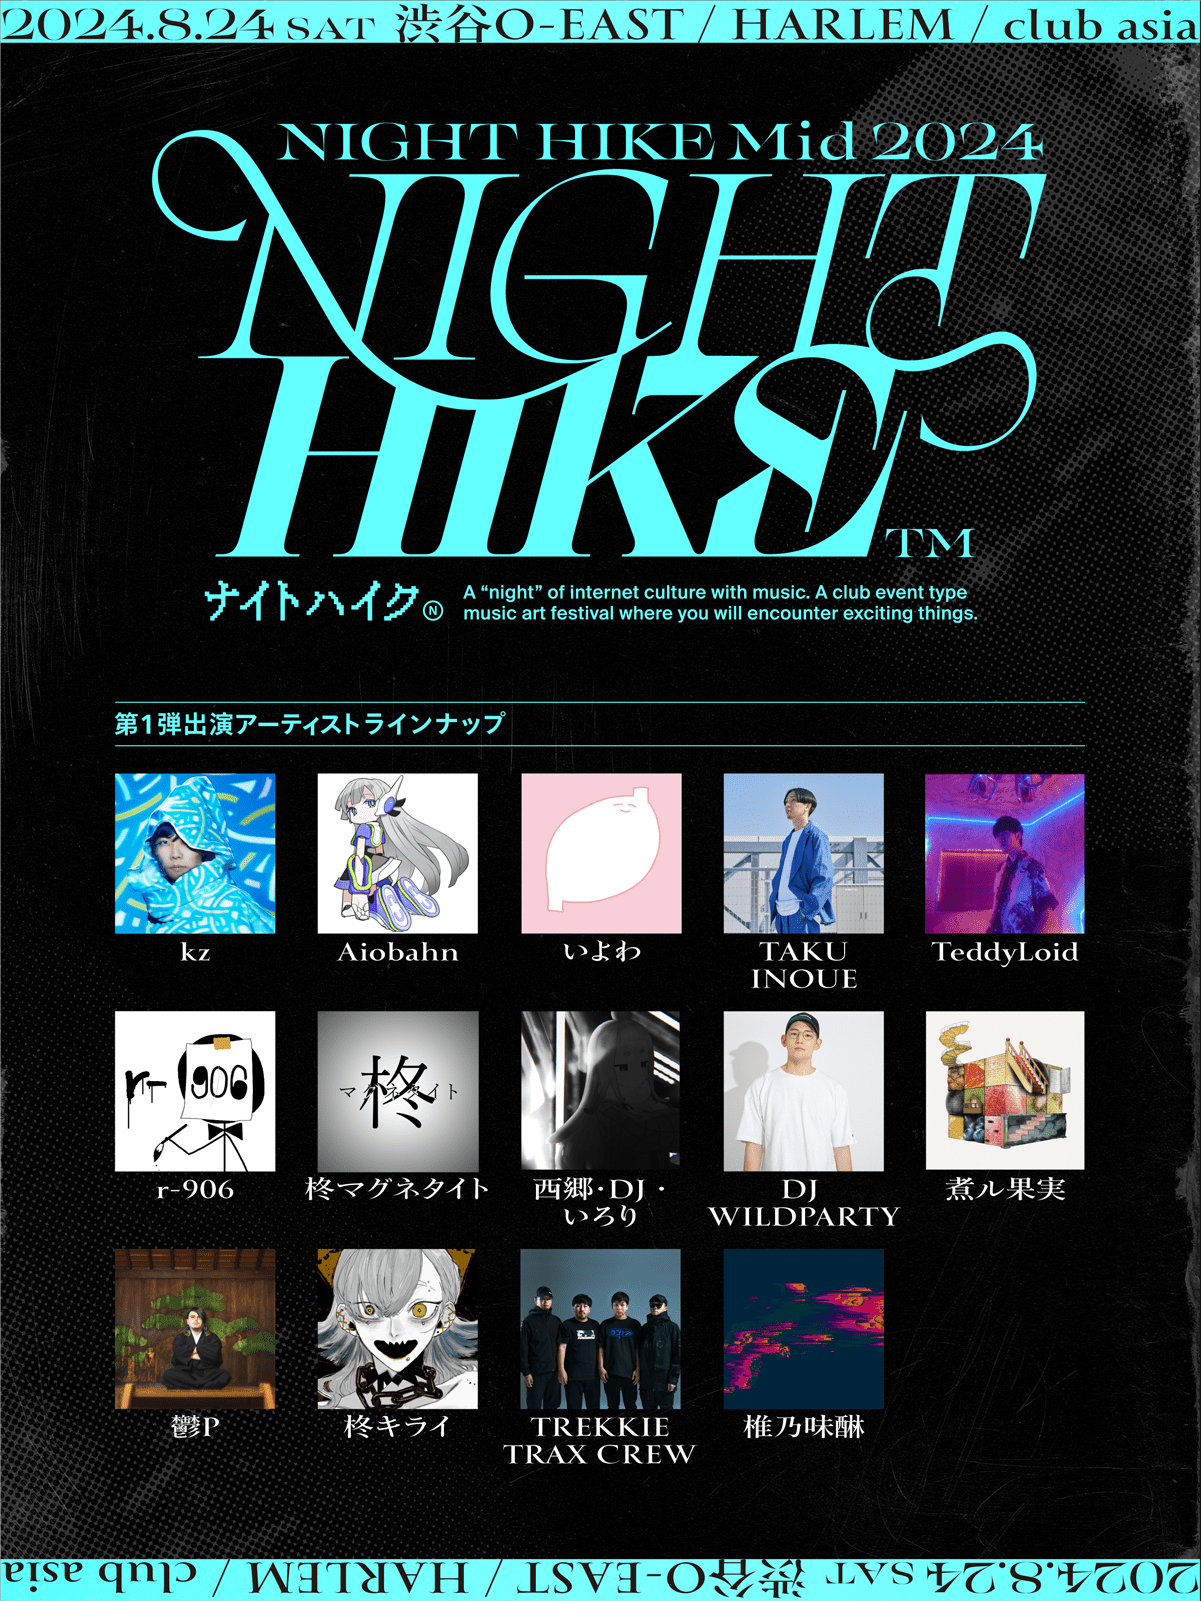 NIGHT HIKE Mid 2024 supported by ジンドゥー | Zaiko